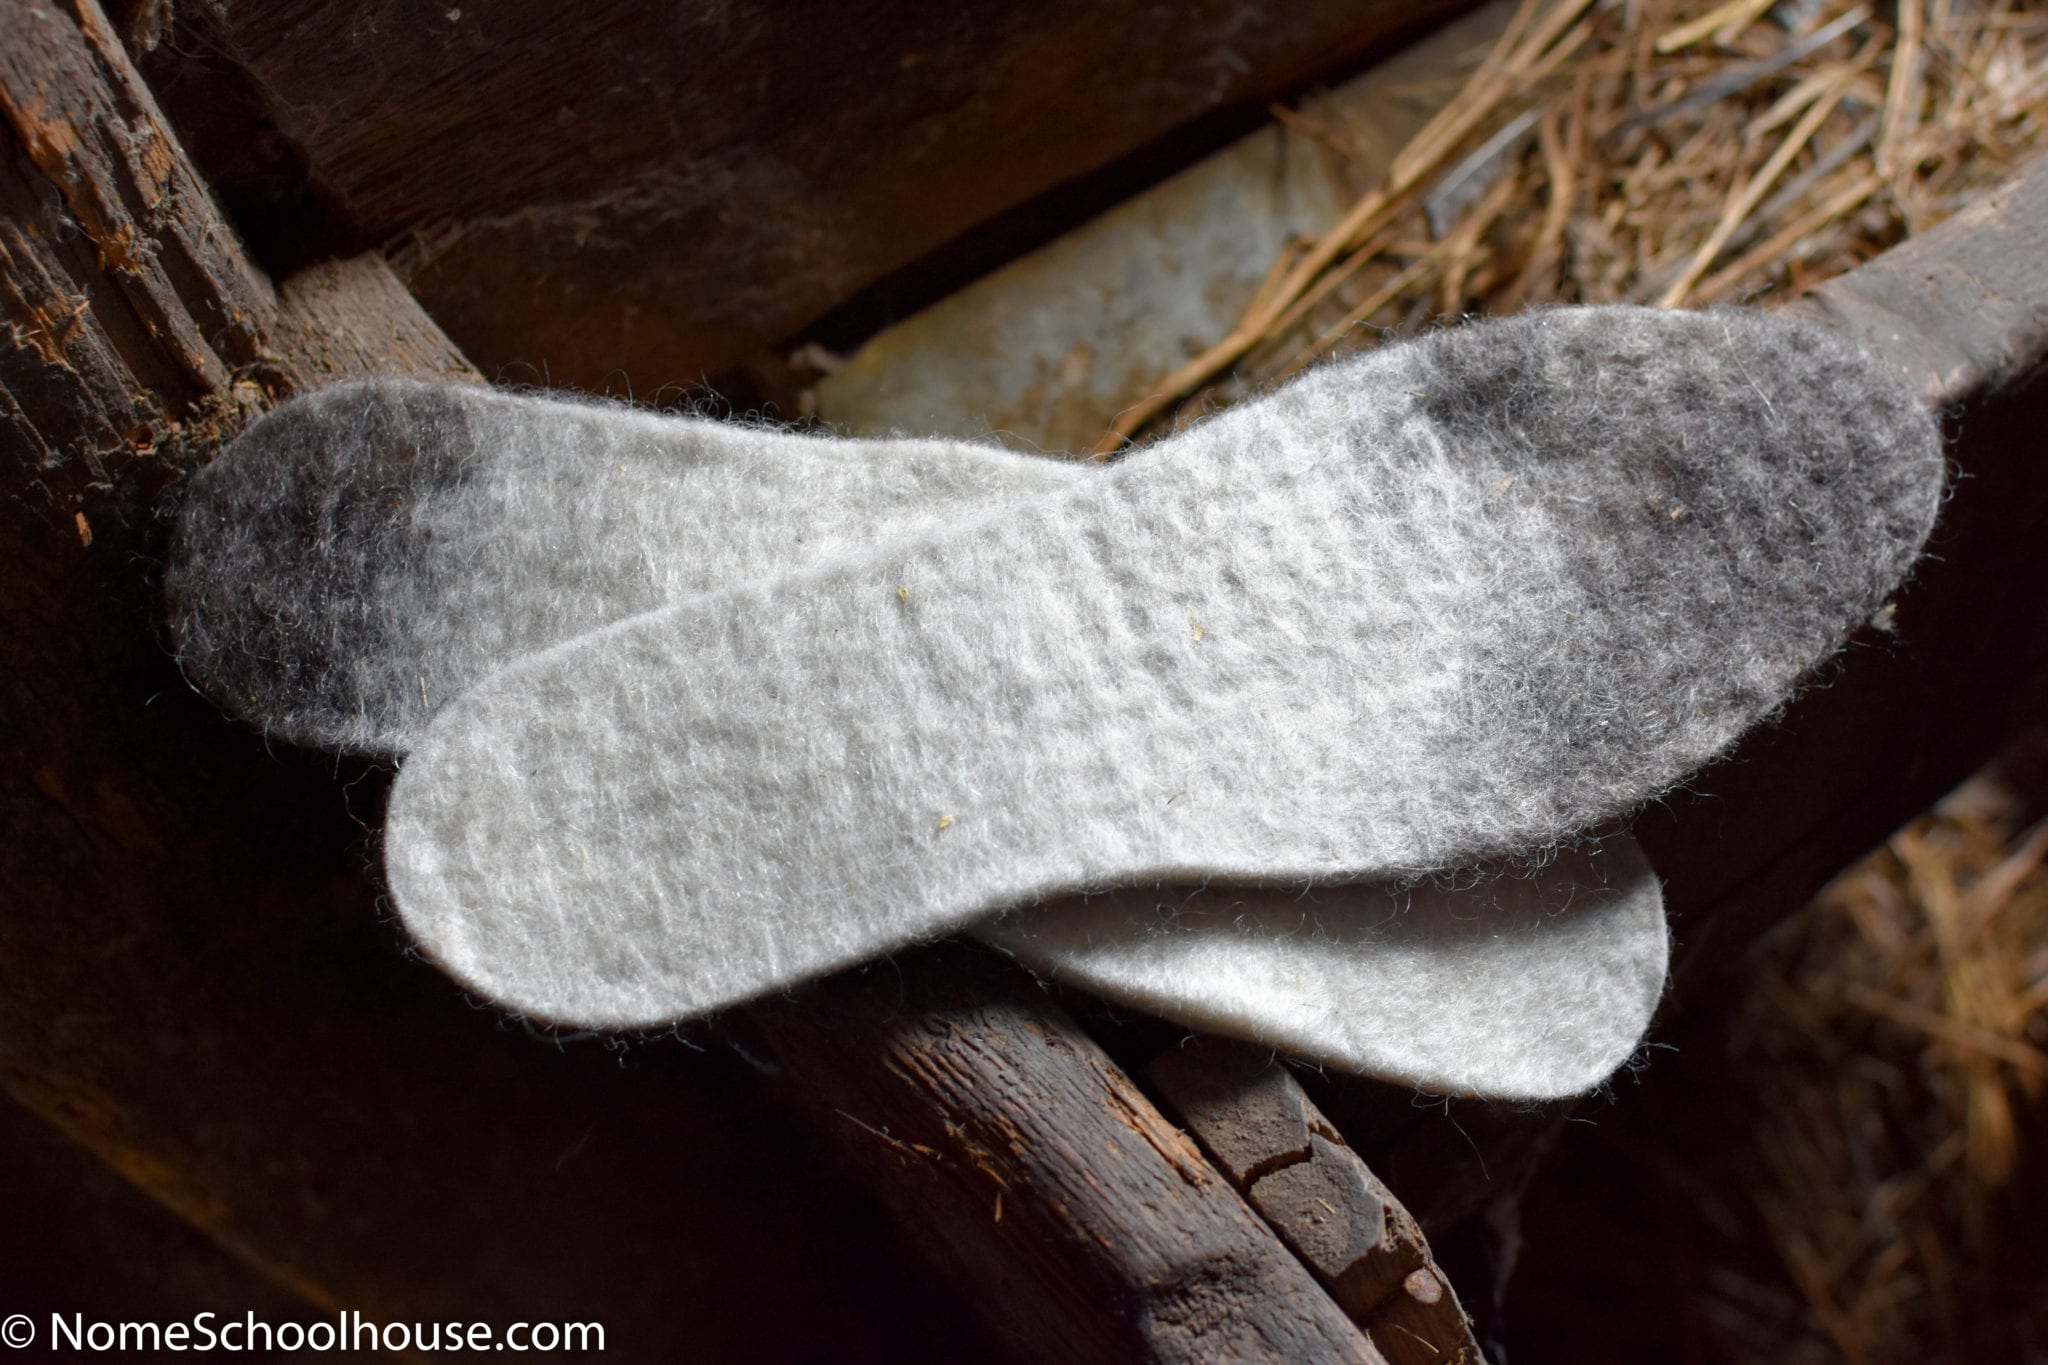 Wool Felt Insoles for shoes, slippers and boots - Bear Creek Felting